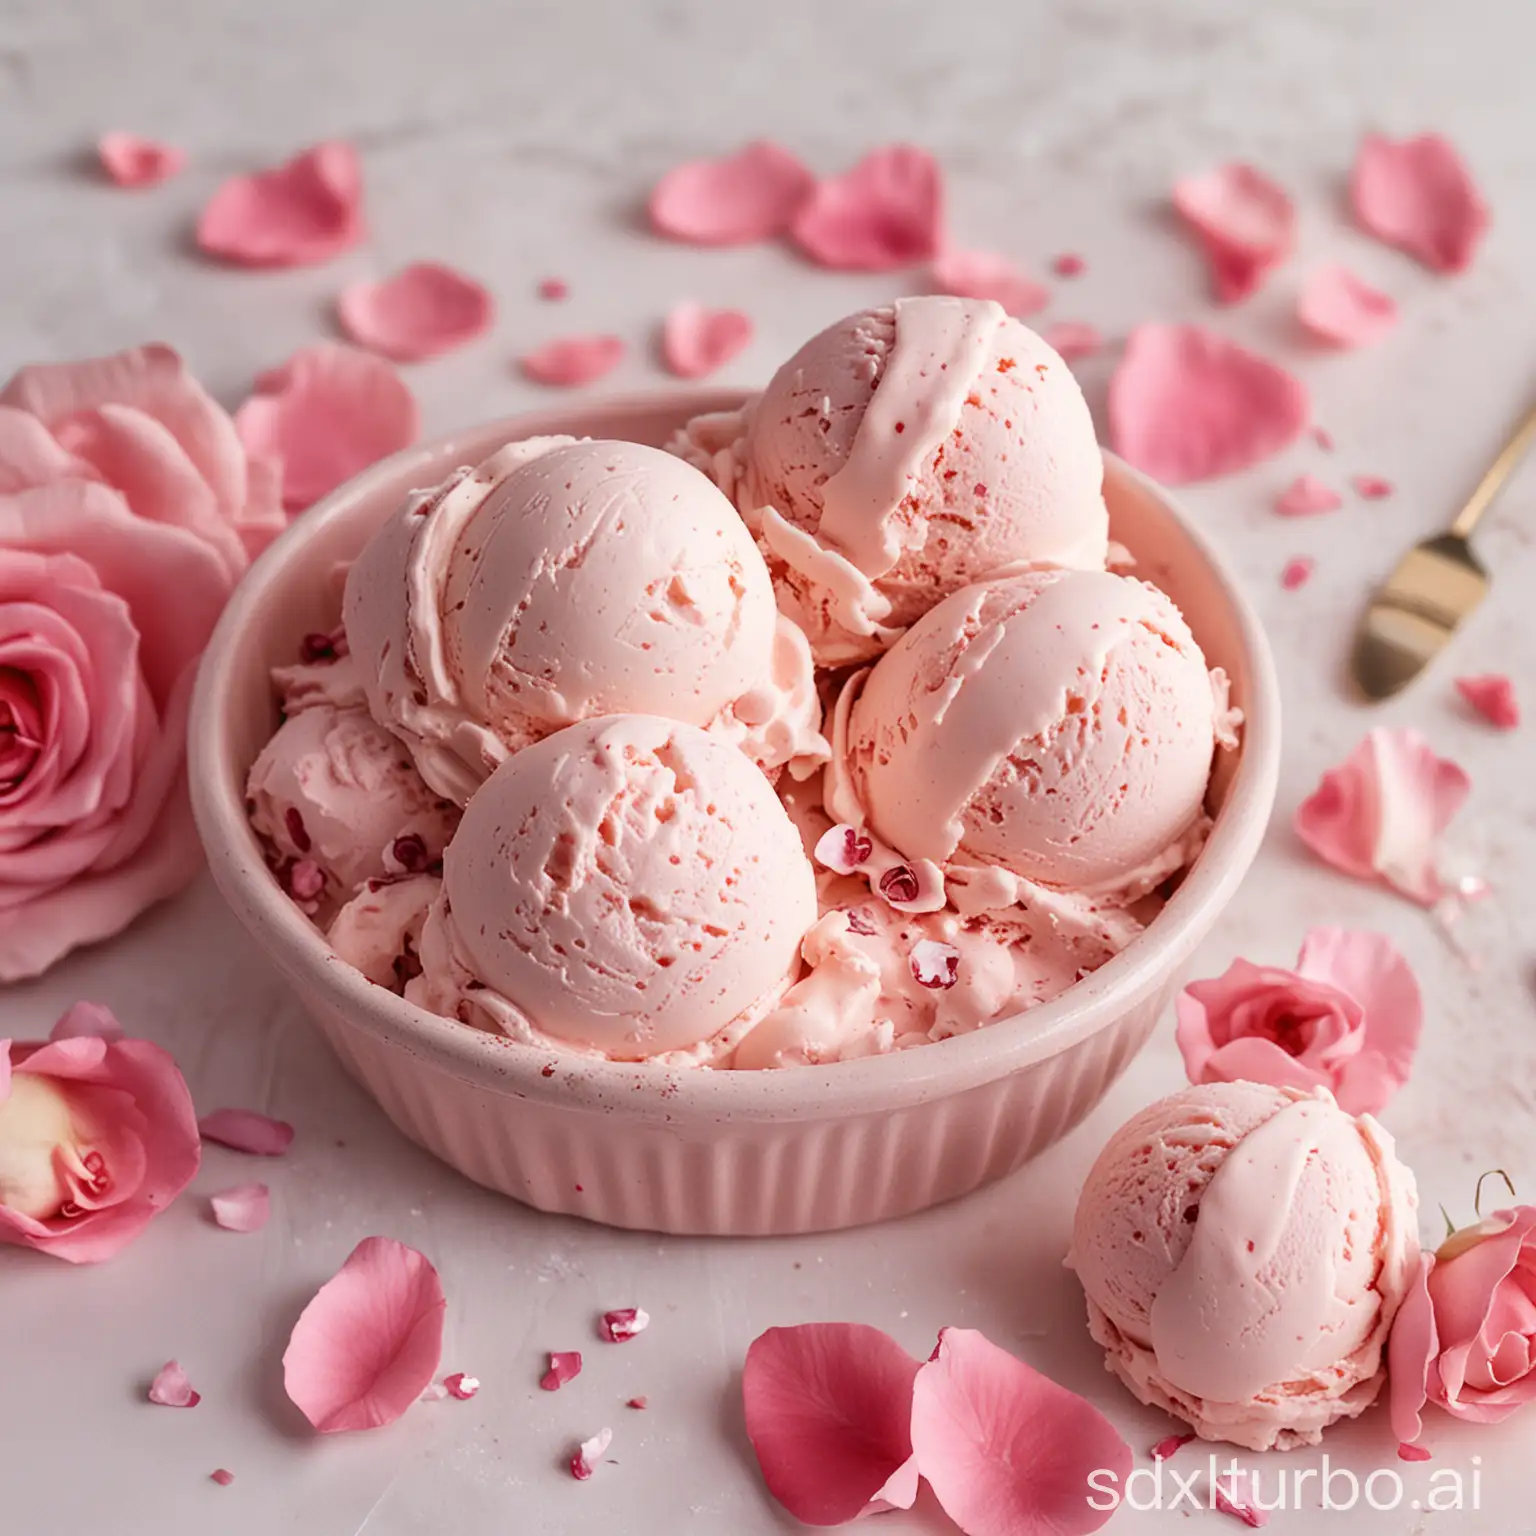 Pale pink ice cream has delicate rose petals scattered on top, not only with a soft and beautiful color, but also releasing a light rose scent. Each spoonful blends the sweetness of ice cream with the elegance of roses, as if tasting a romantic story.